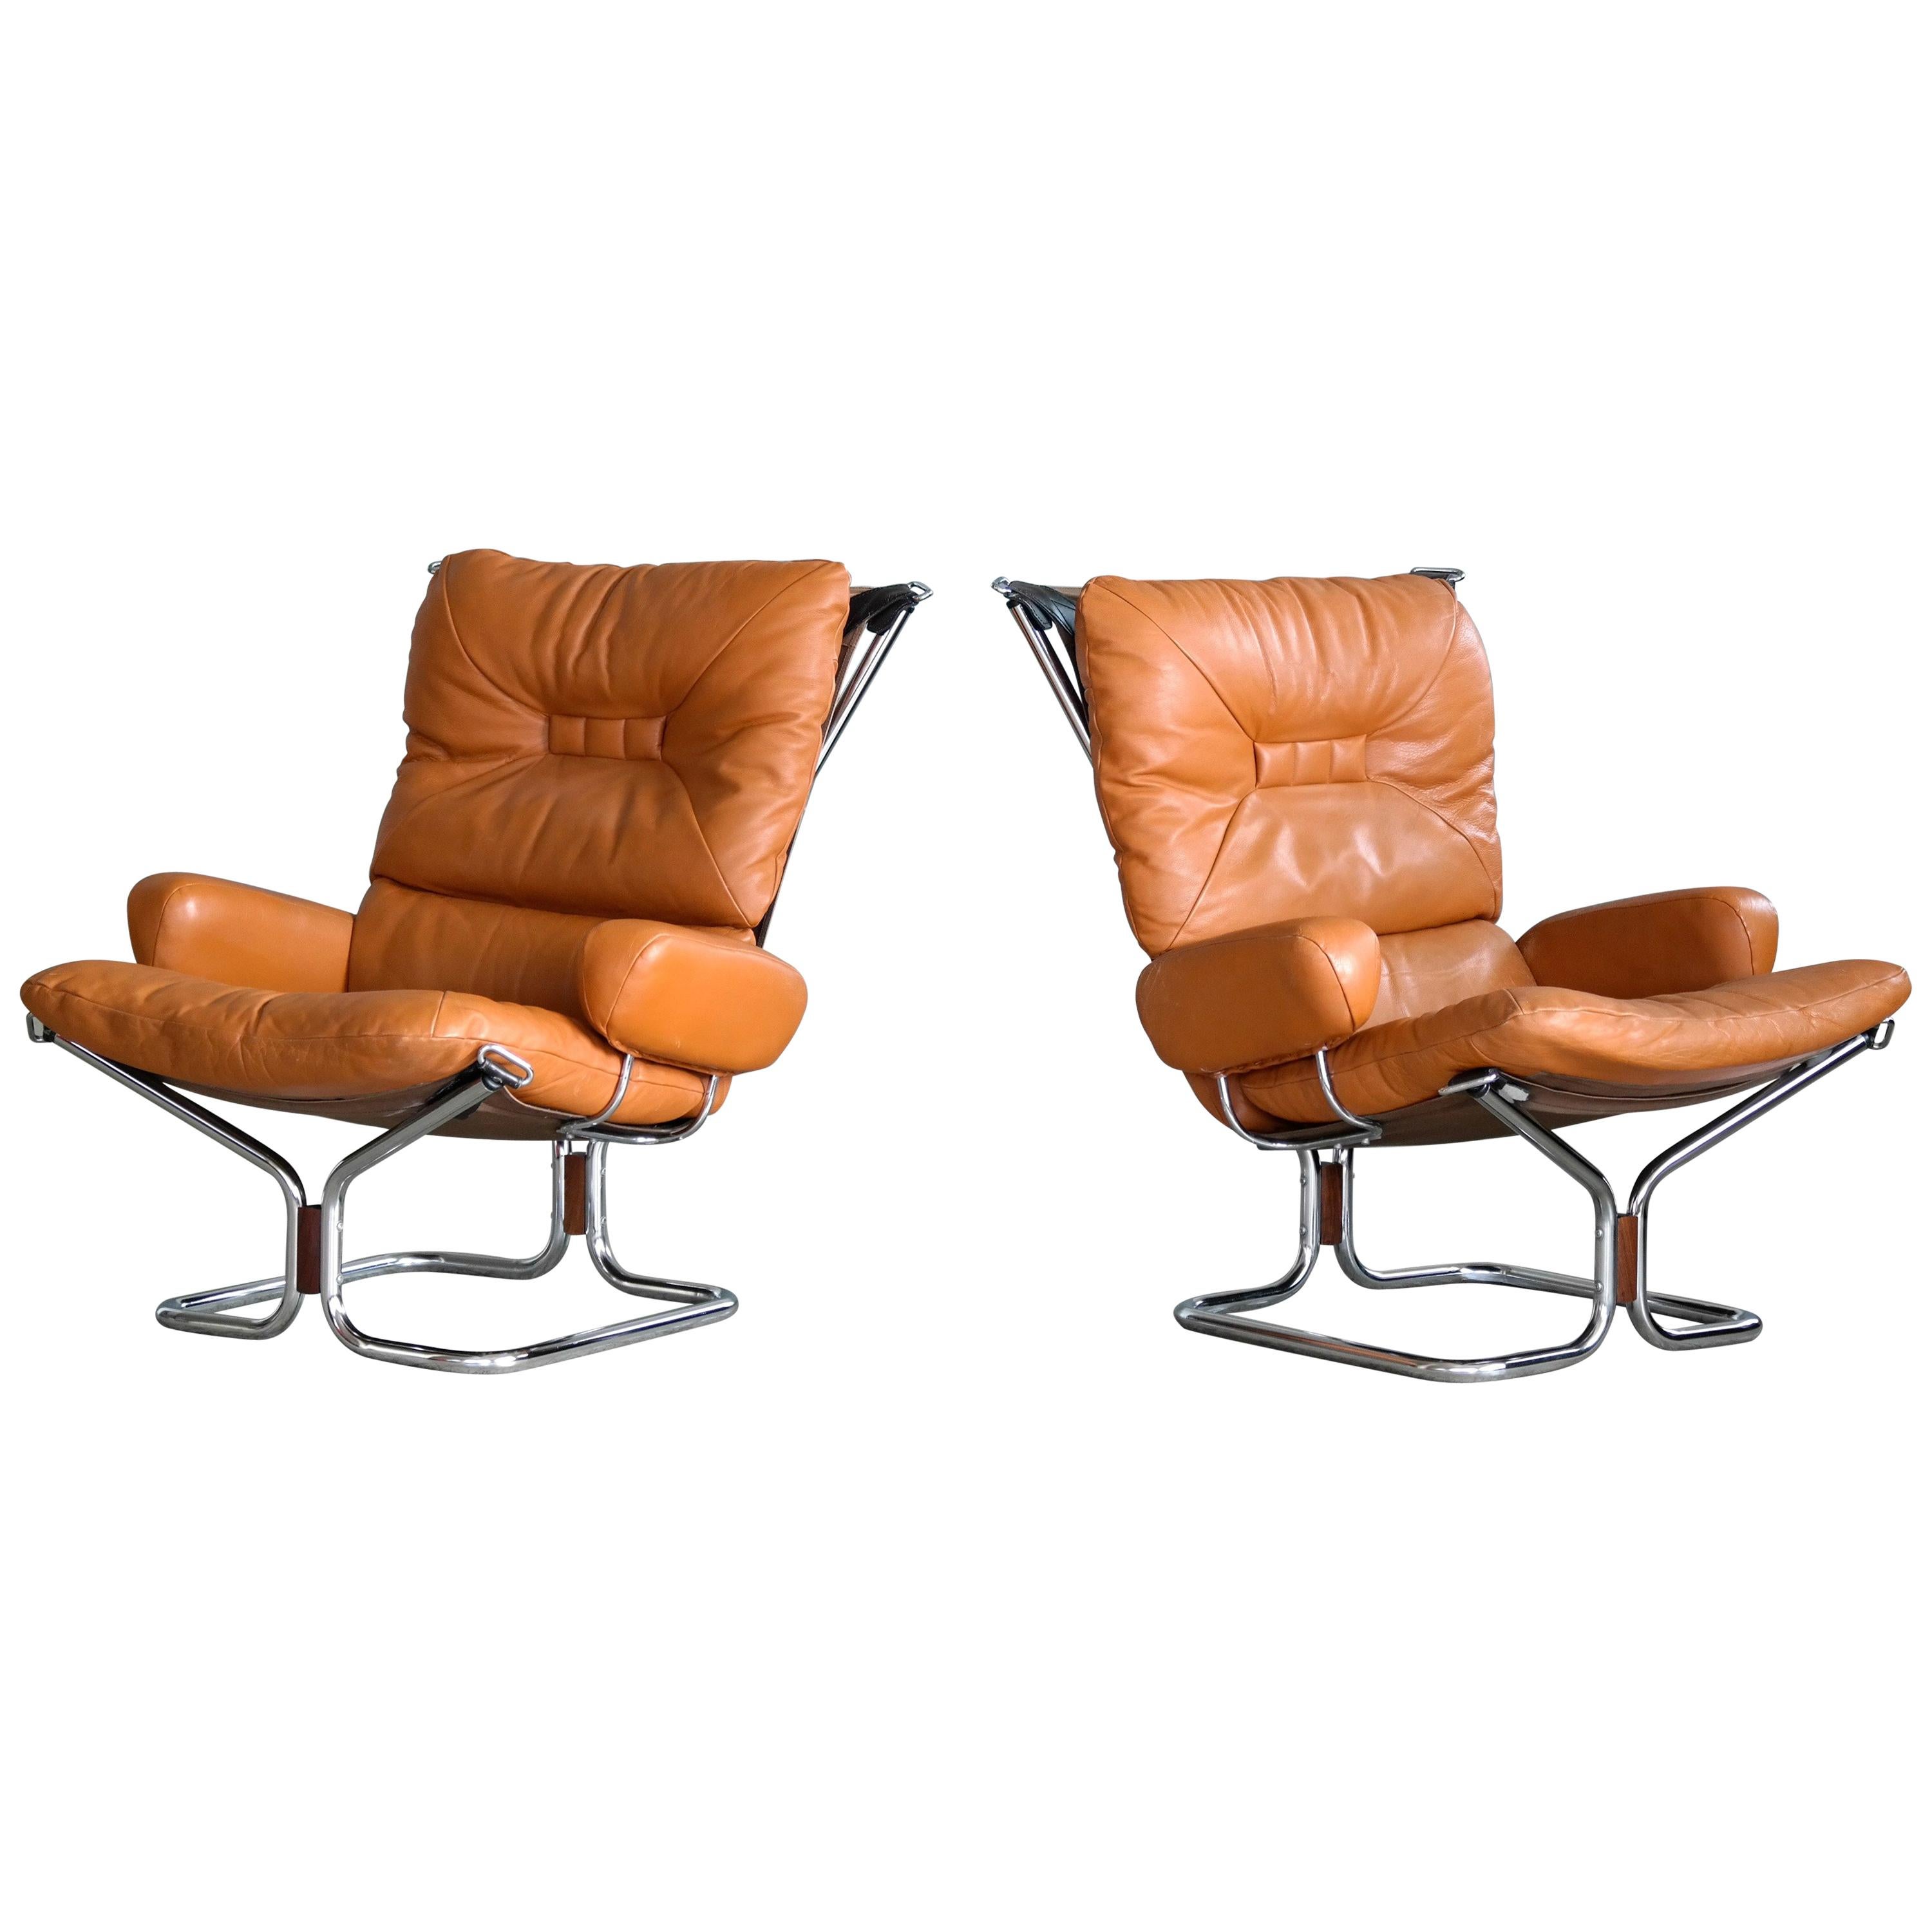 Pair of Relling Model "Wing" Lounge Chairs and Ottoman in Cognac Leather